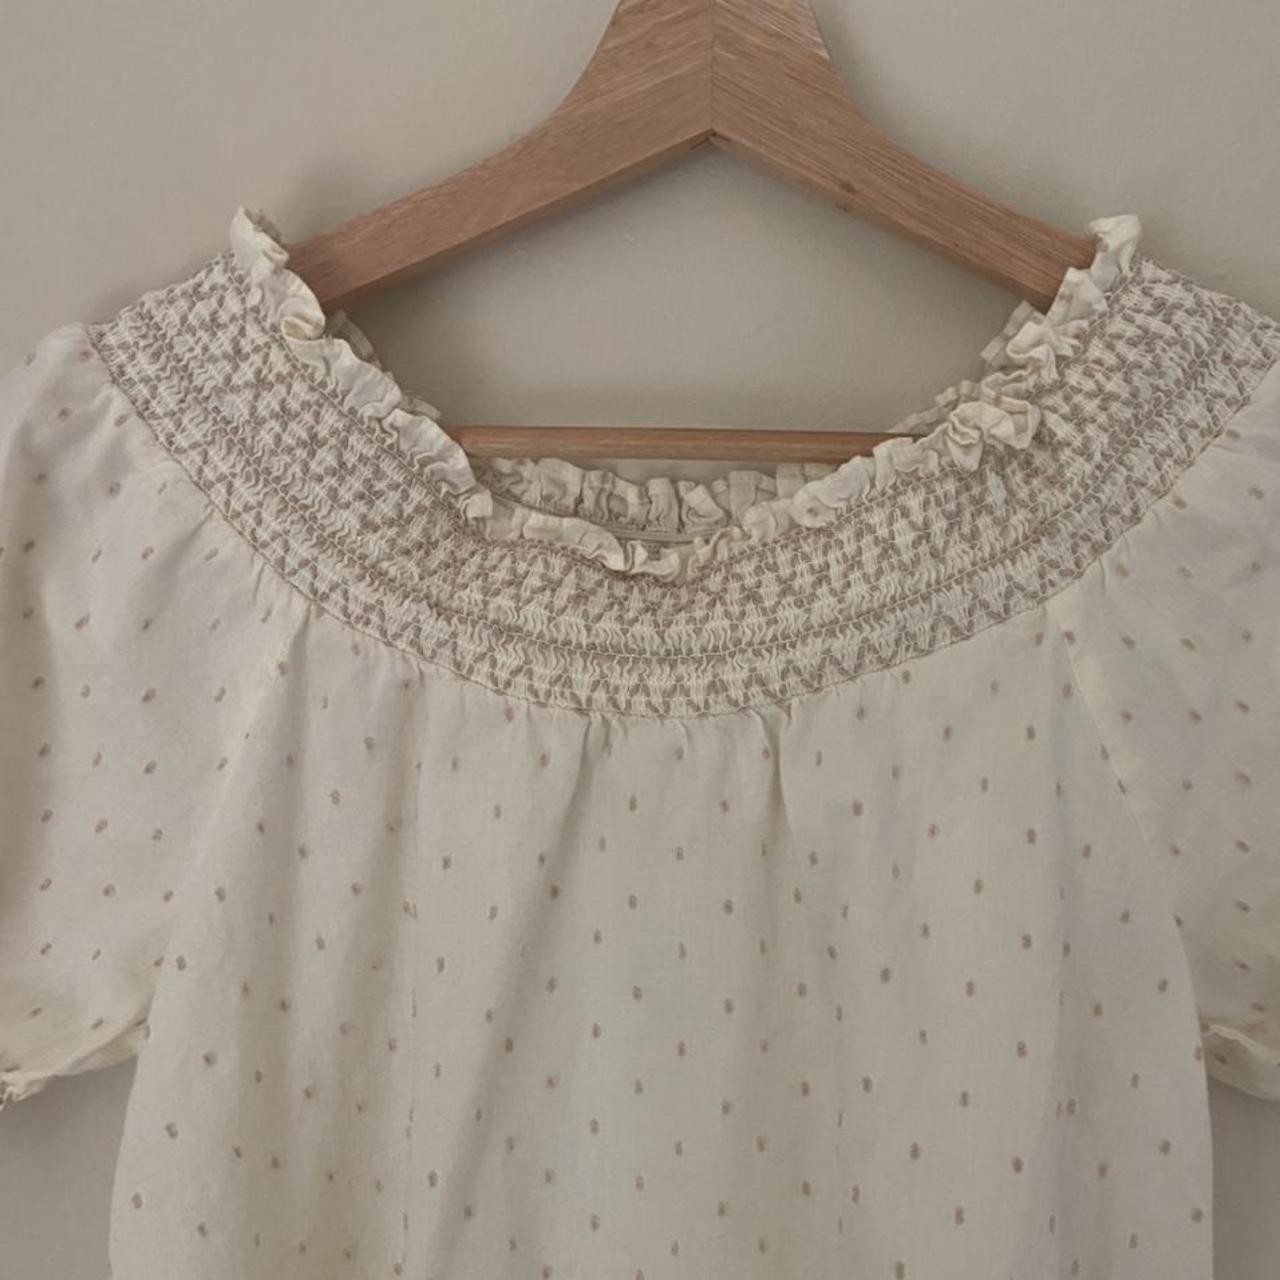 Product Image 2 - Doen-inspired top from Adored Vintage